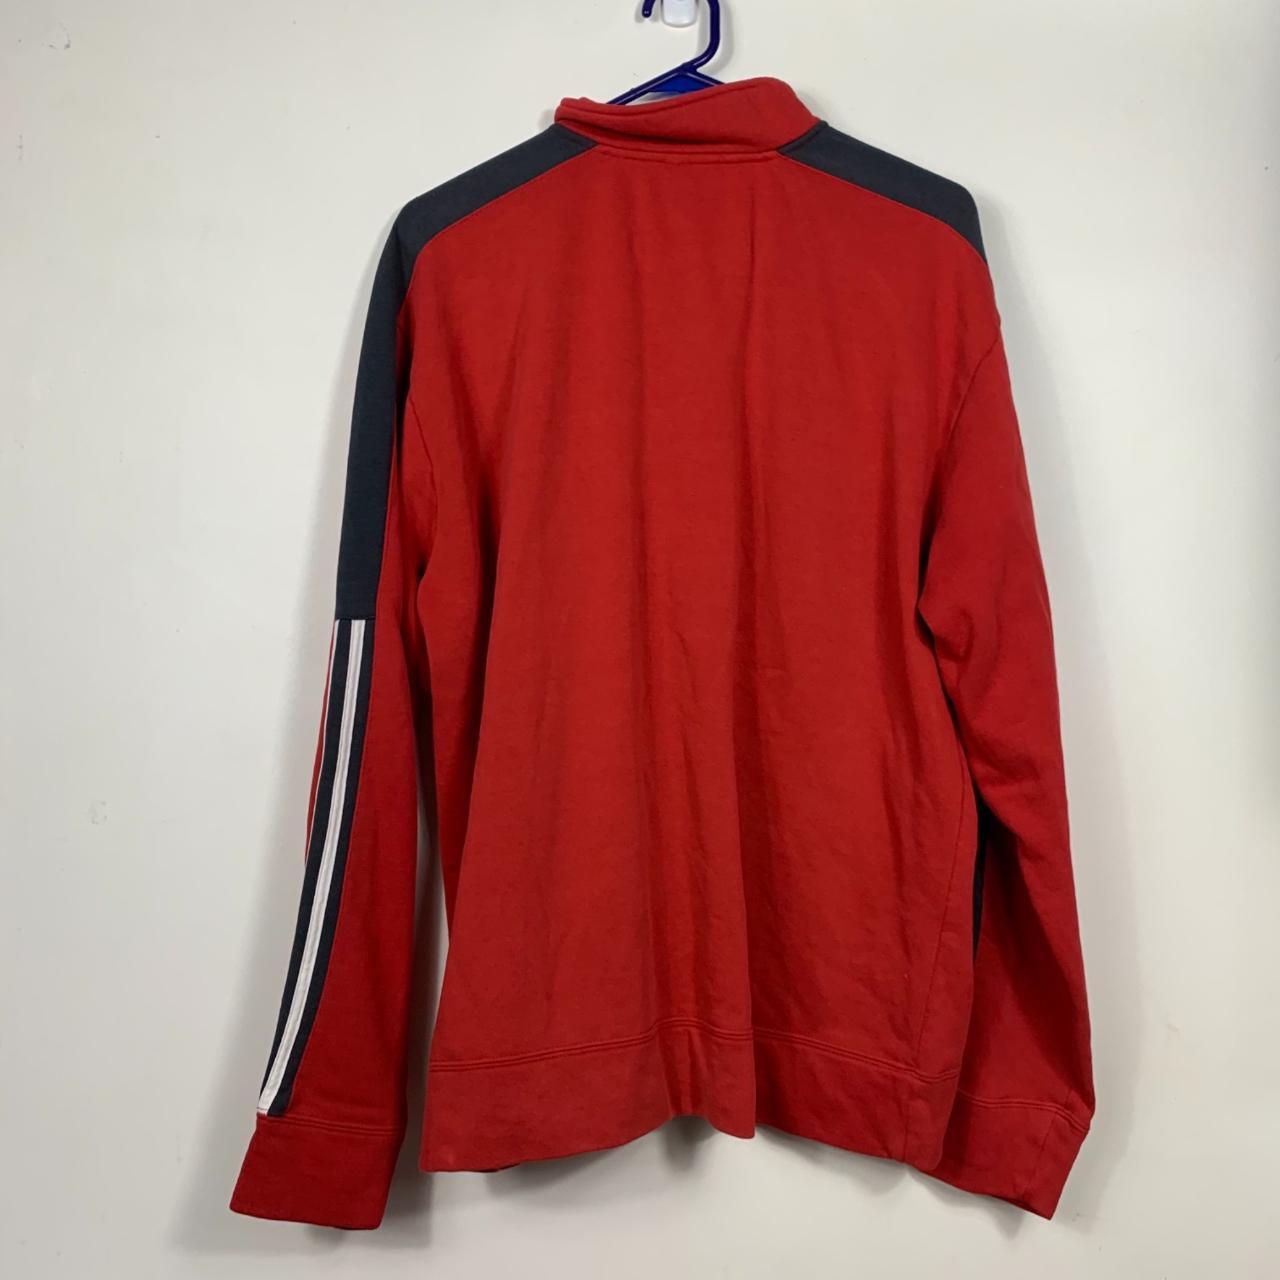 Adidas Red Tracksuit Jacket Mens Size XL Red... - Depop